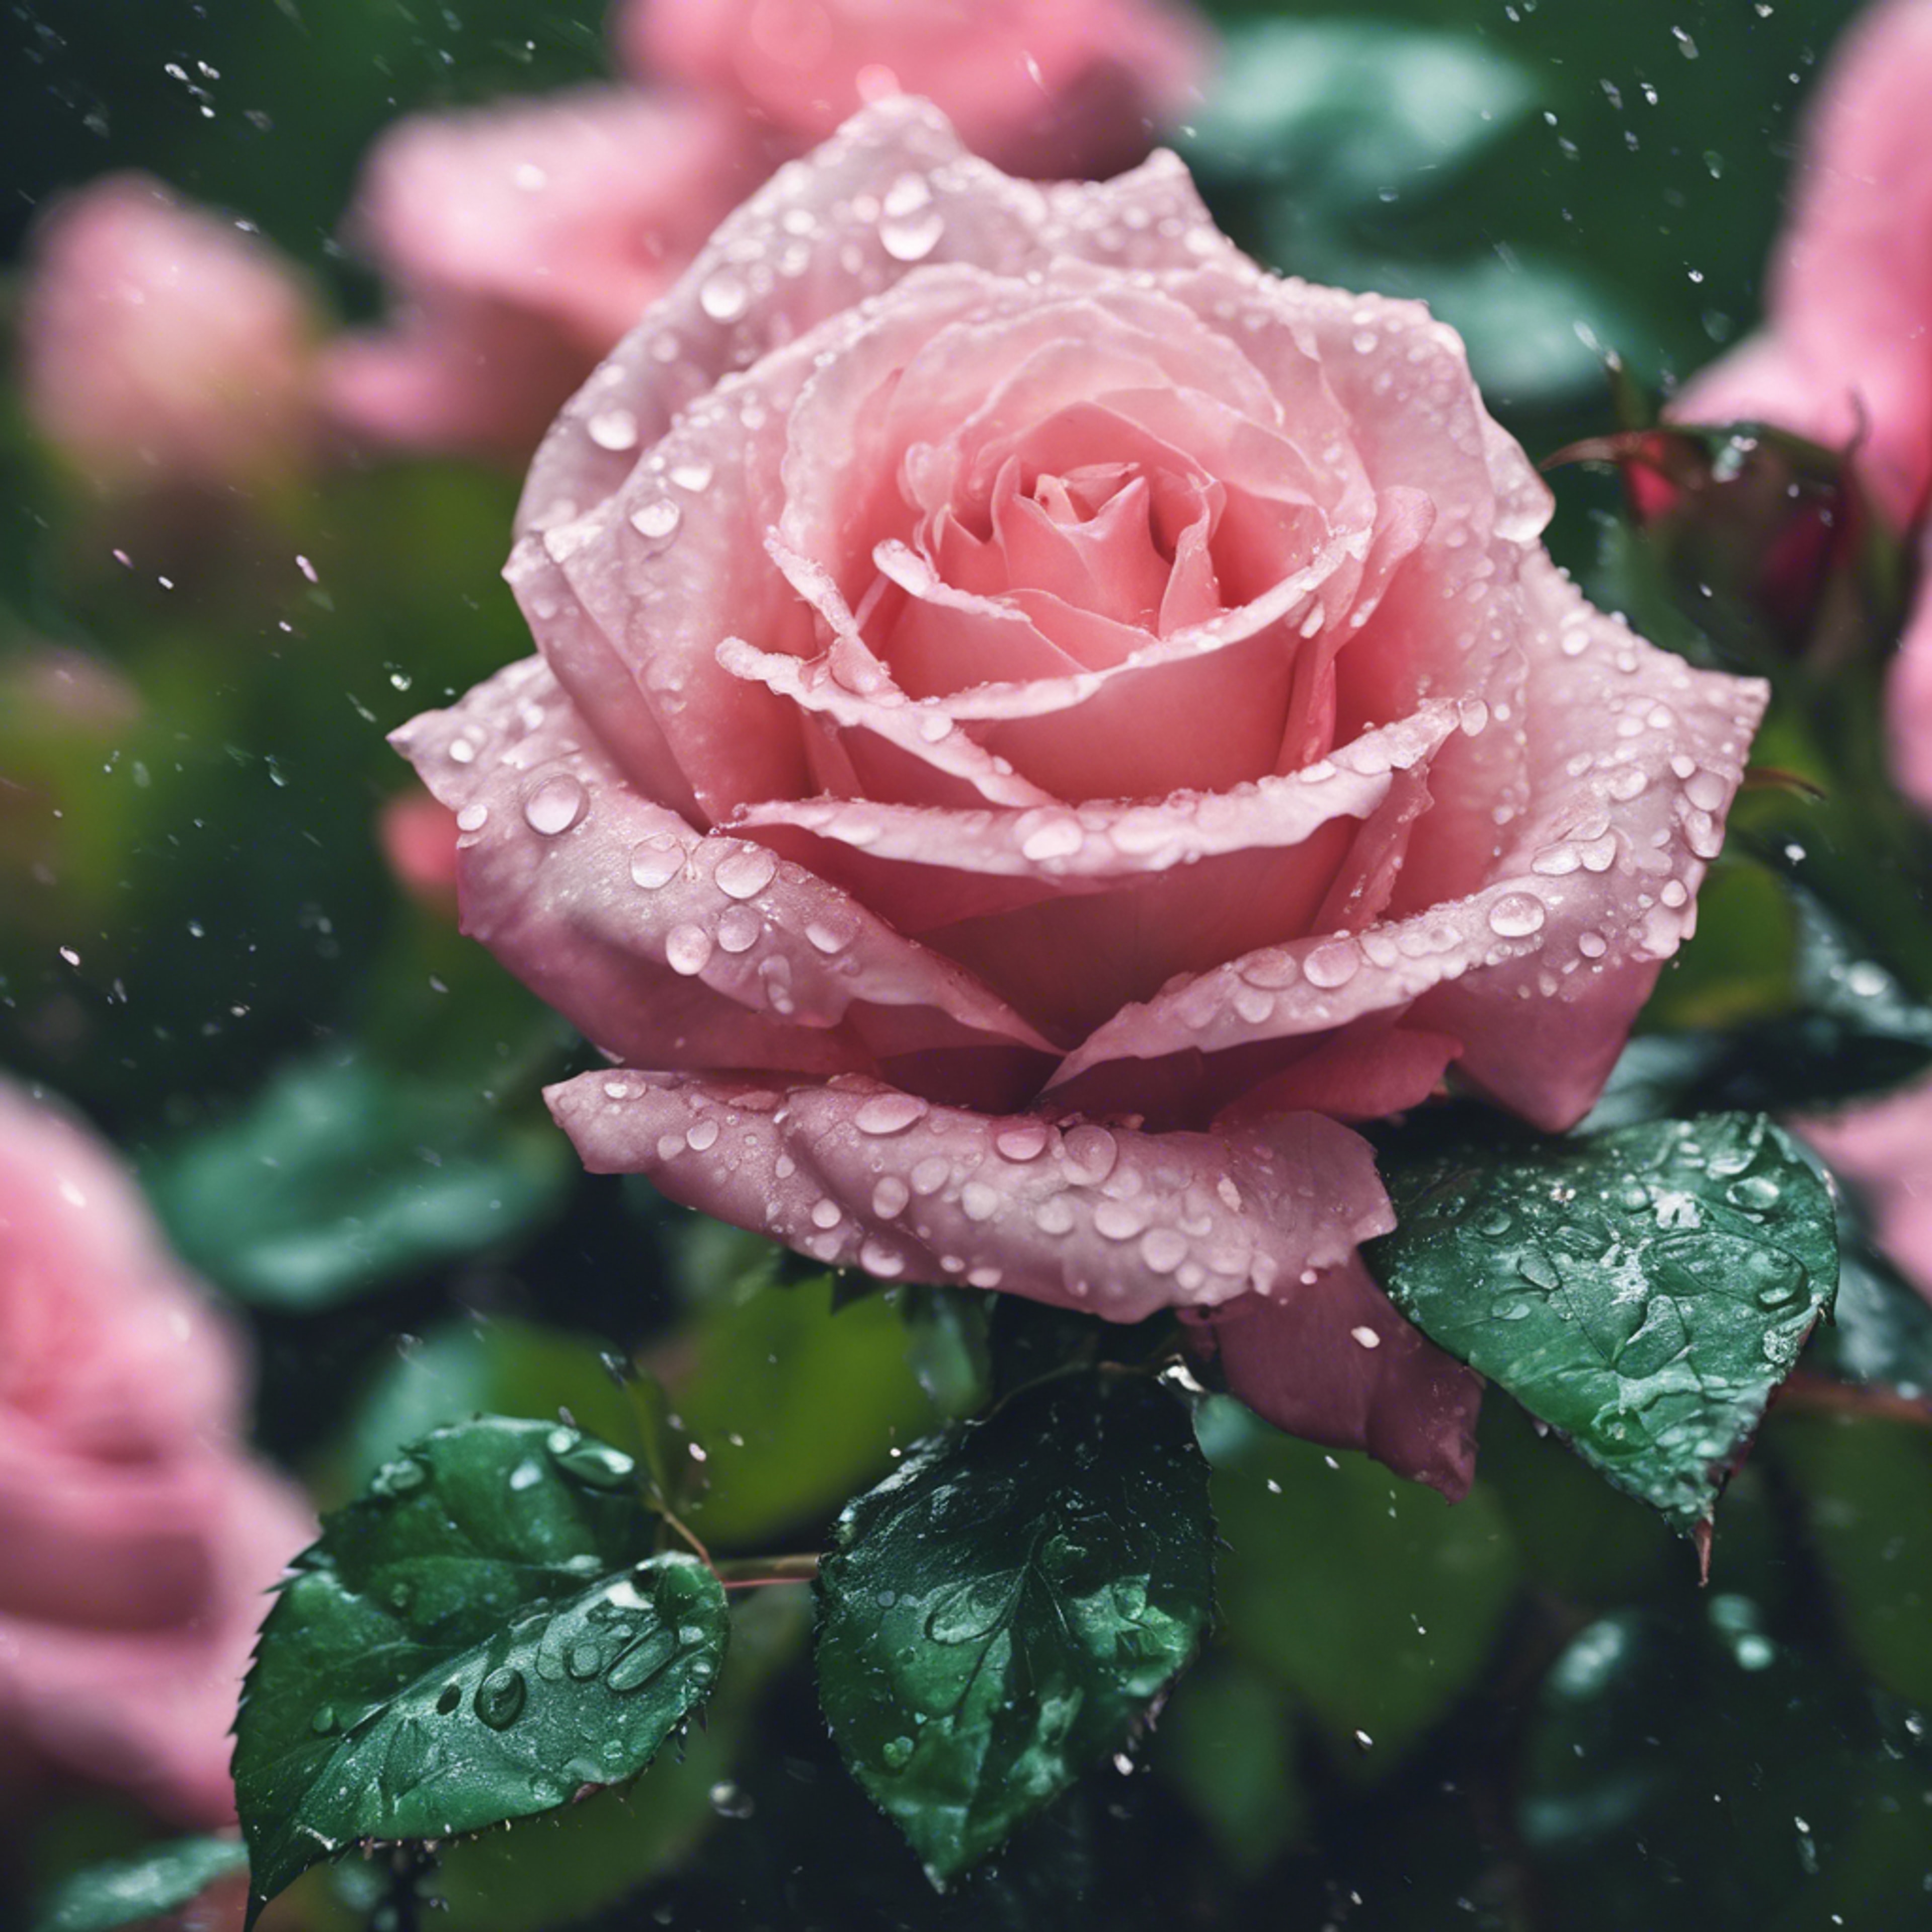 Gentle rain falling on the bright green leaves and pink roses. Обои[2479f95970de45b492b9]